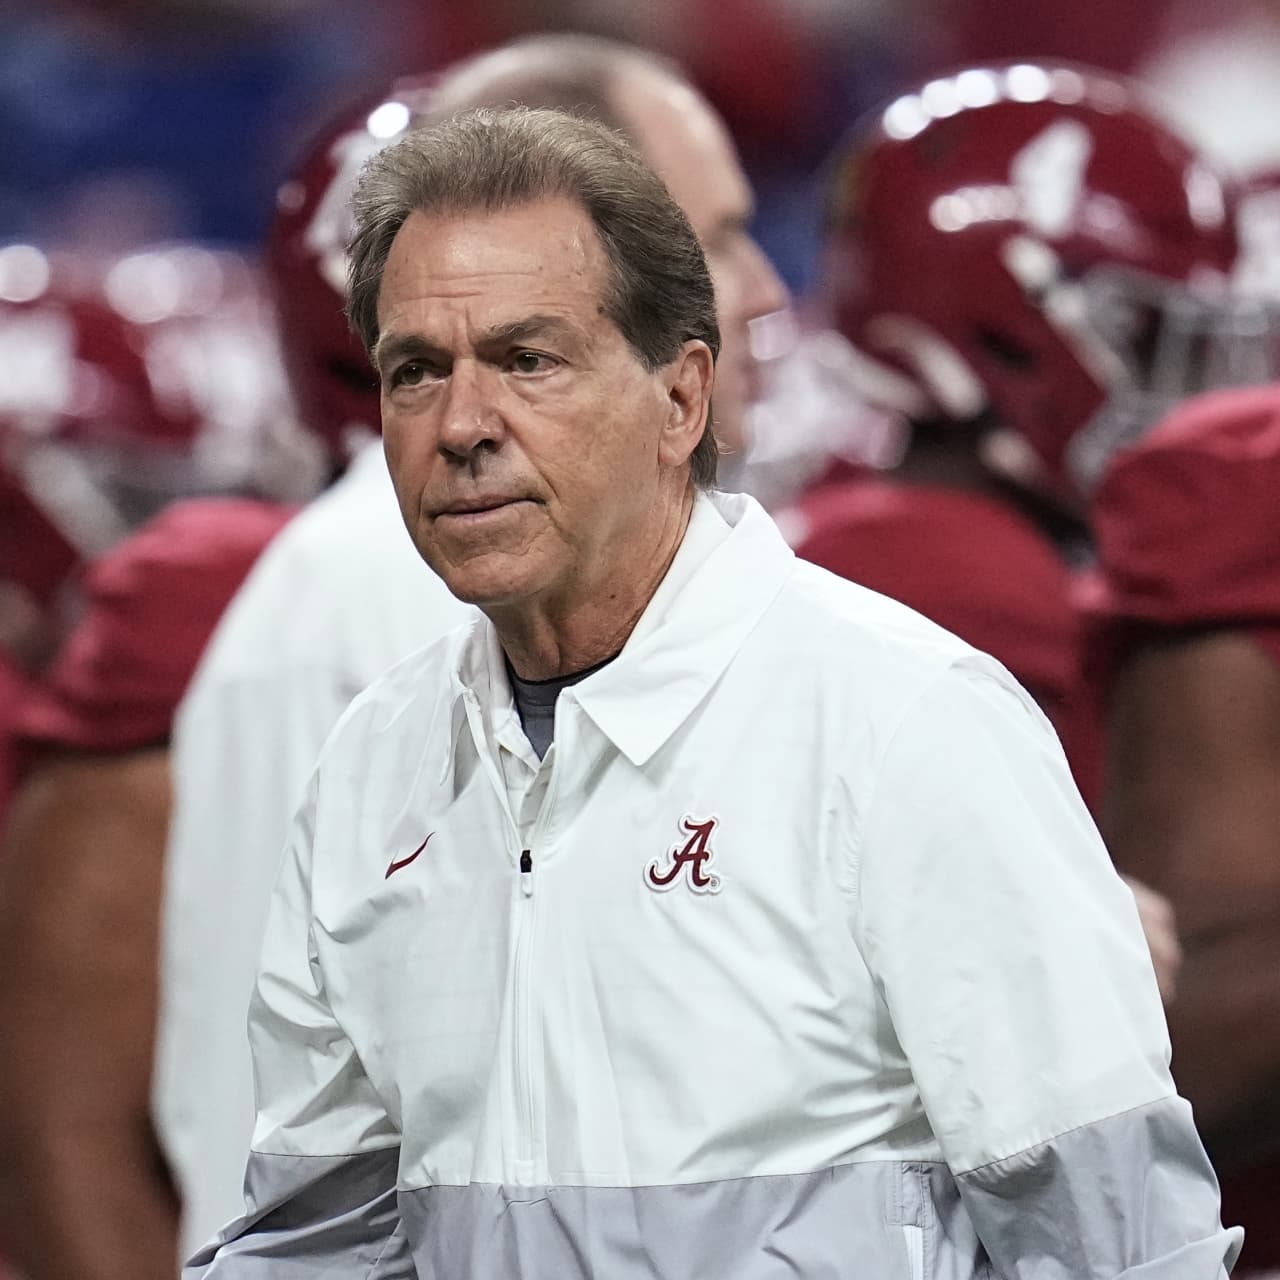 Alabama football coach Nick Saban accuses other schools of 'buying' players  with name, image and likeness deals - MarketWatch